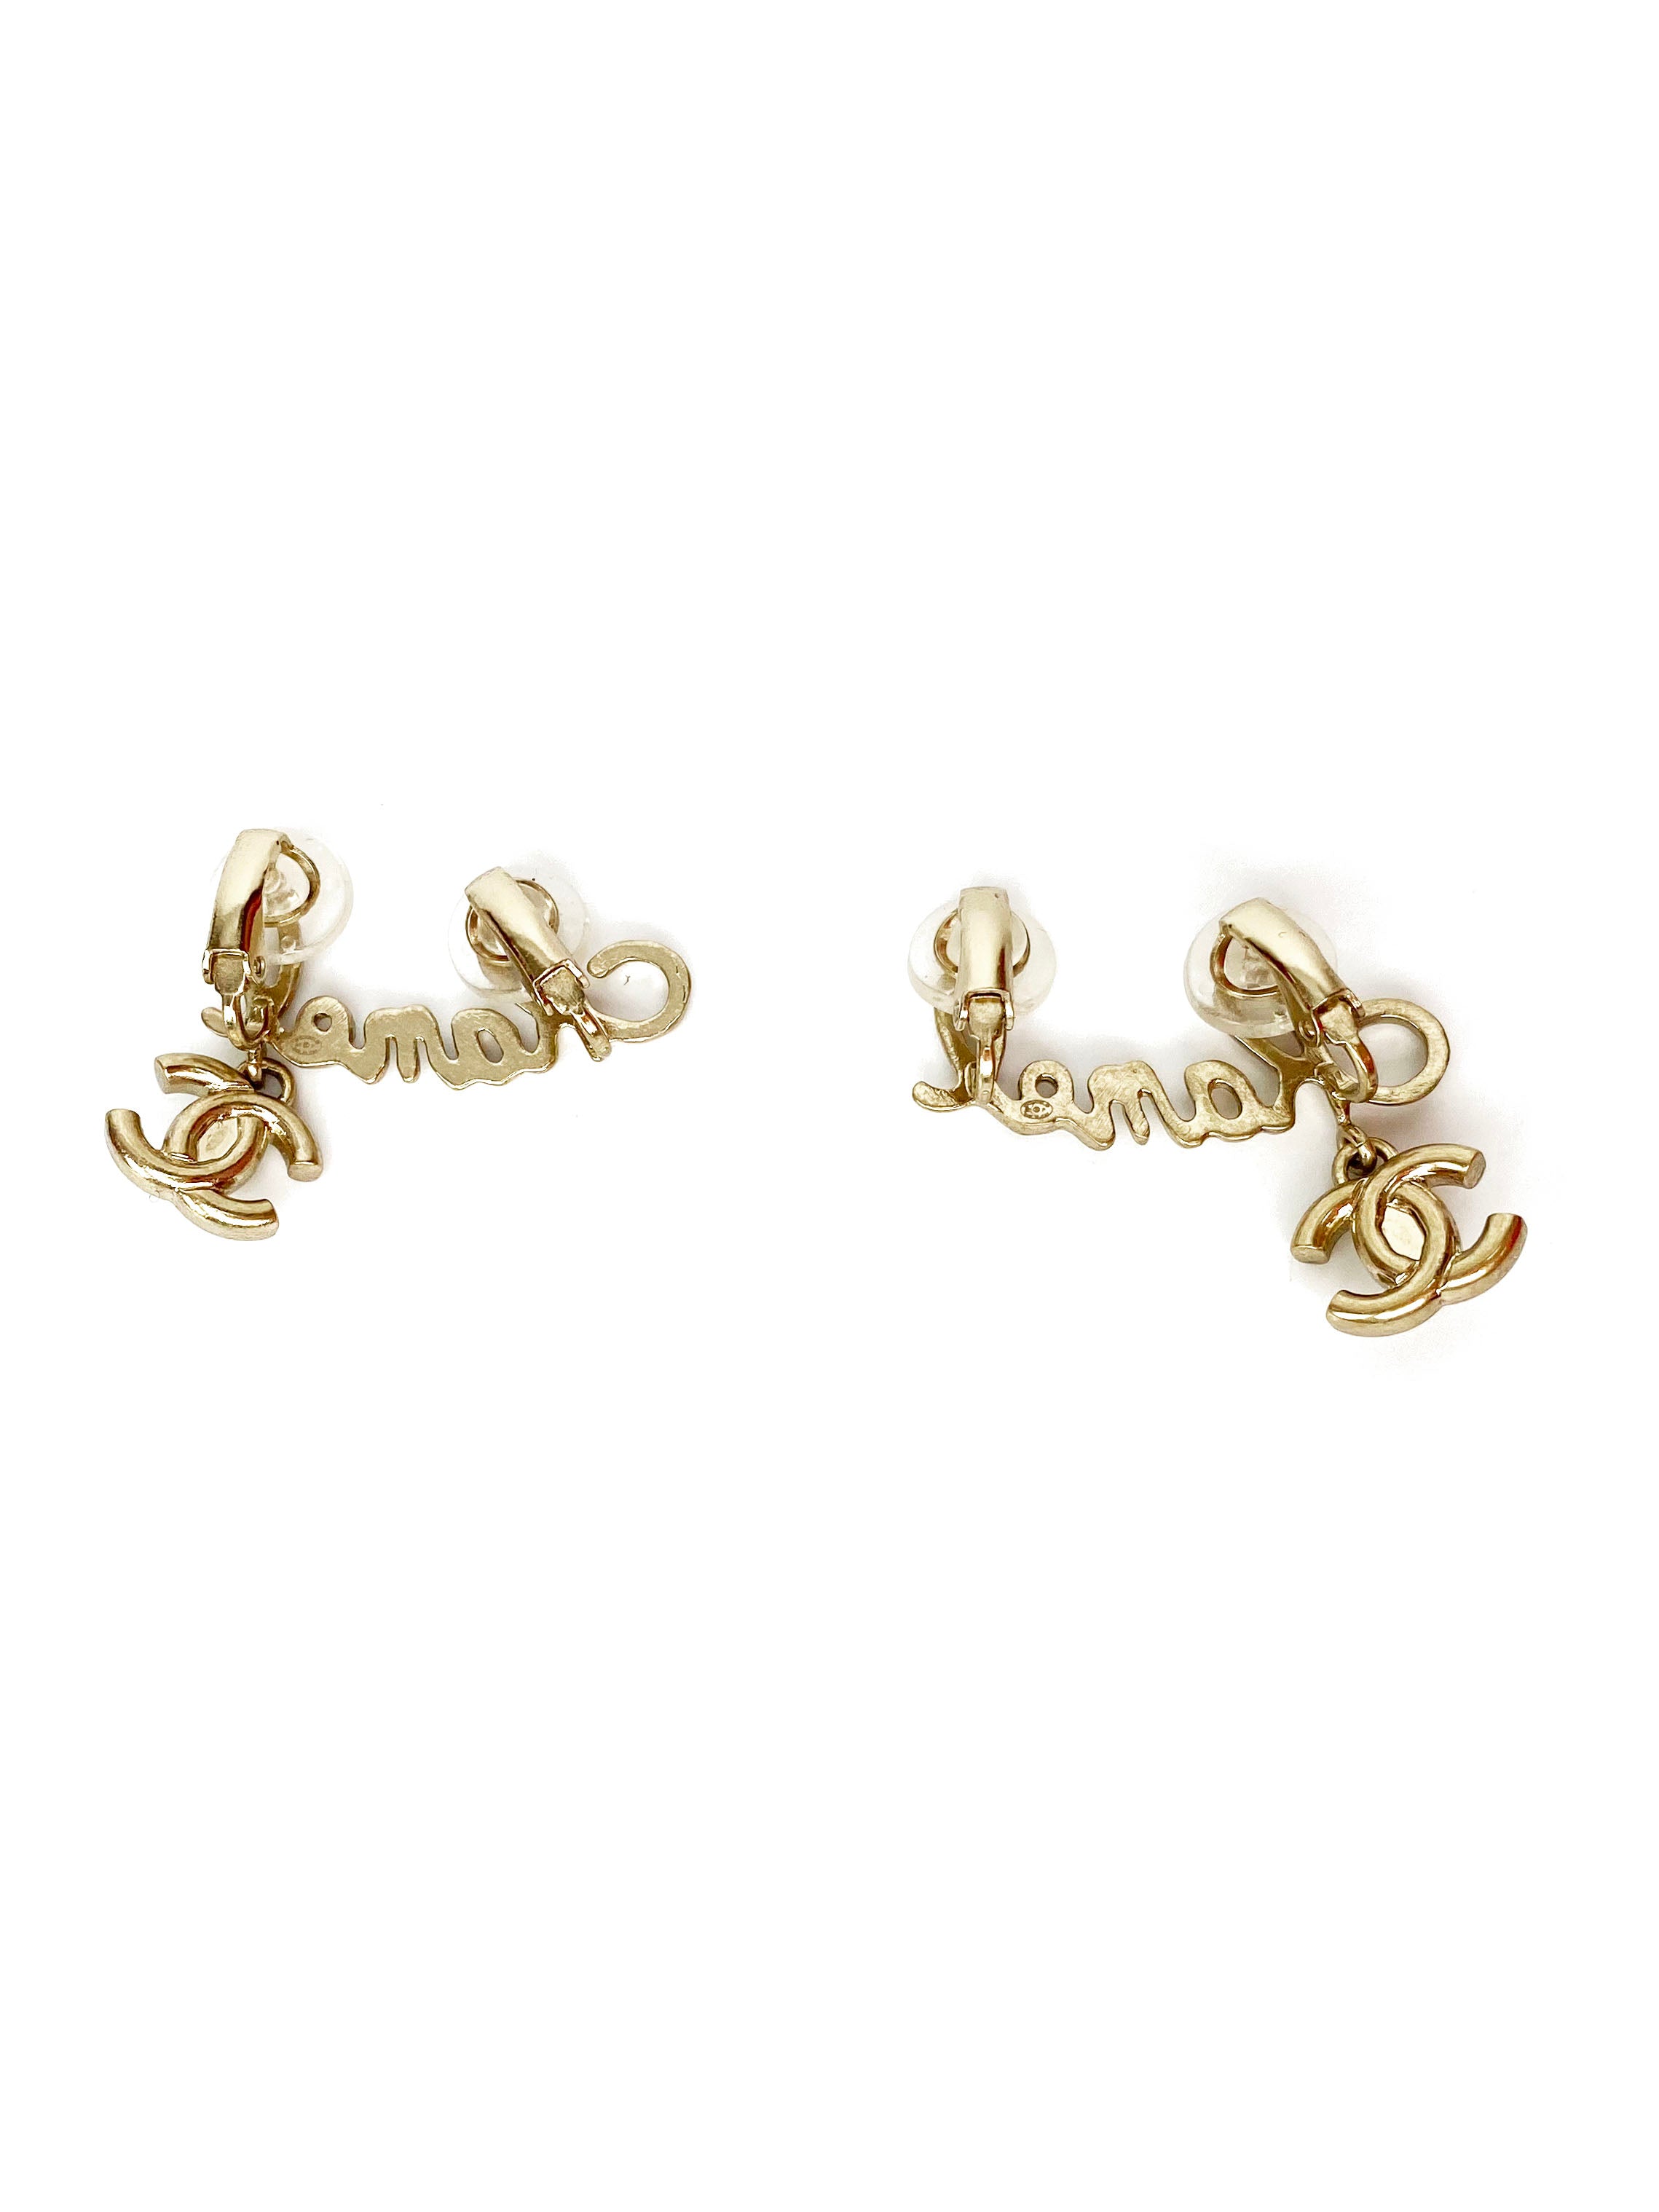 Chanel Clip On Earrings with Dangling CC Logo